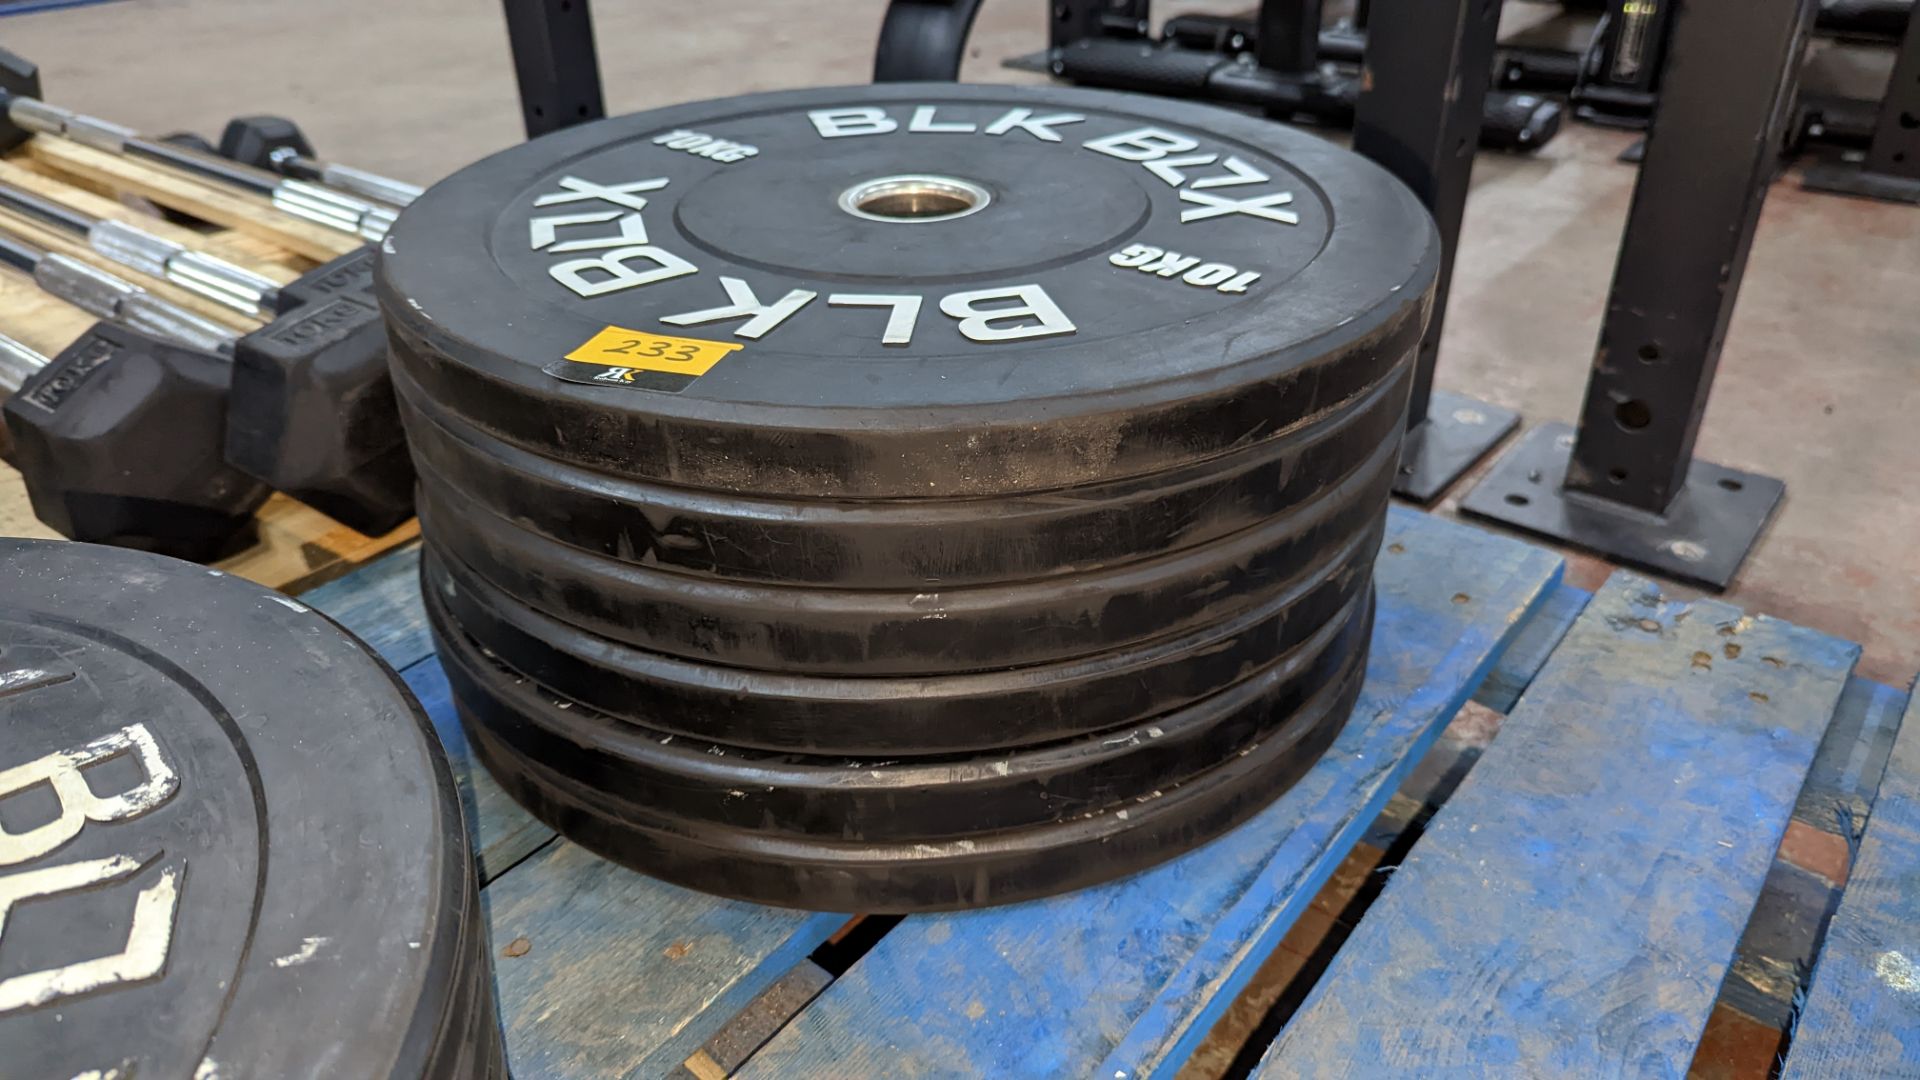 6 off BLKBOX 10kg rubberised Olympic plates - Image 3 of 3